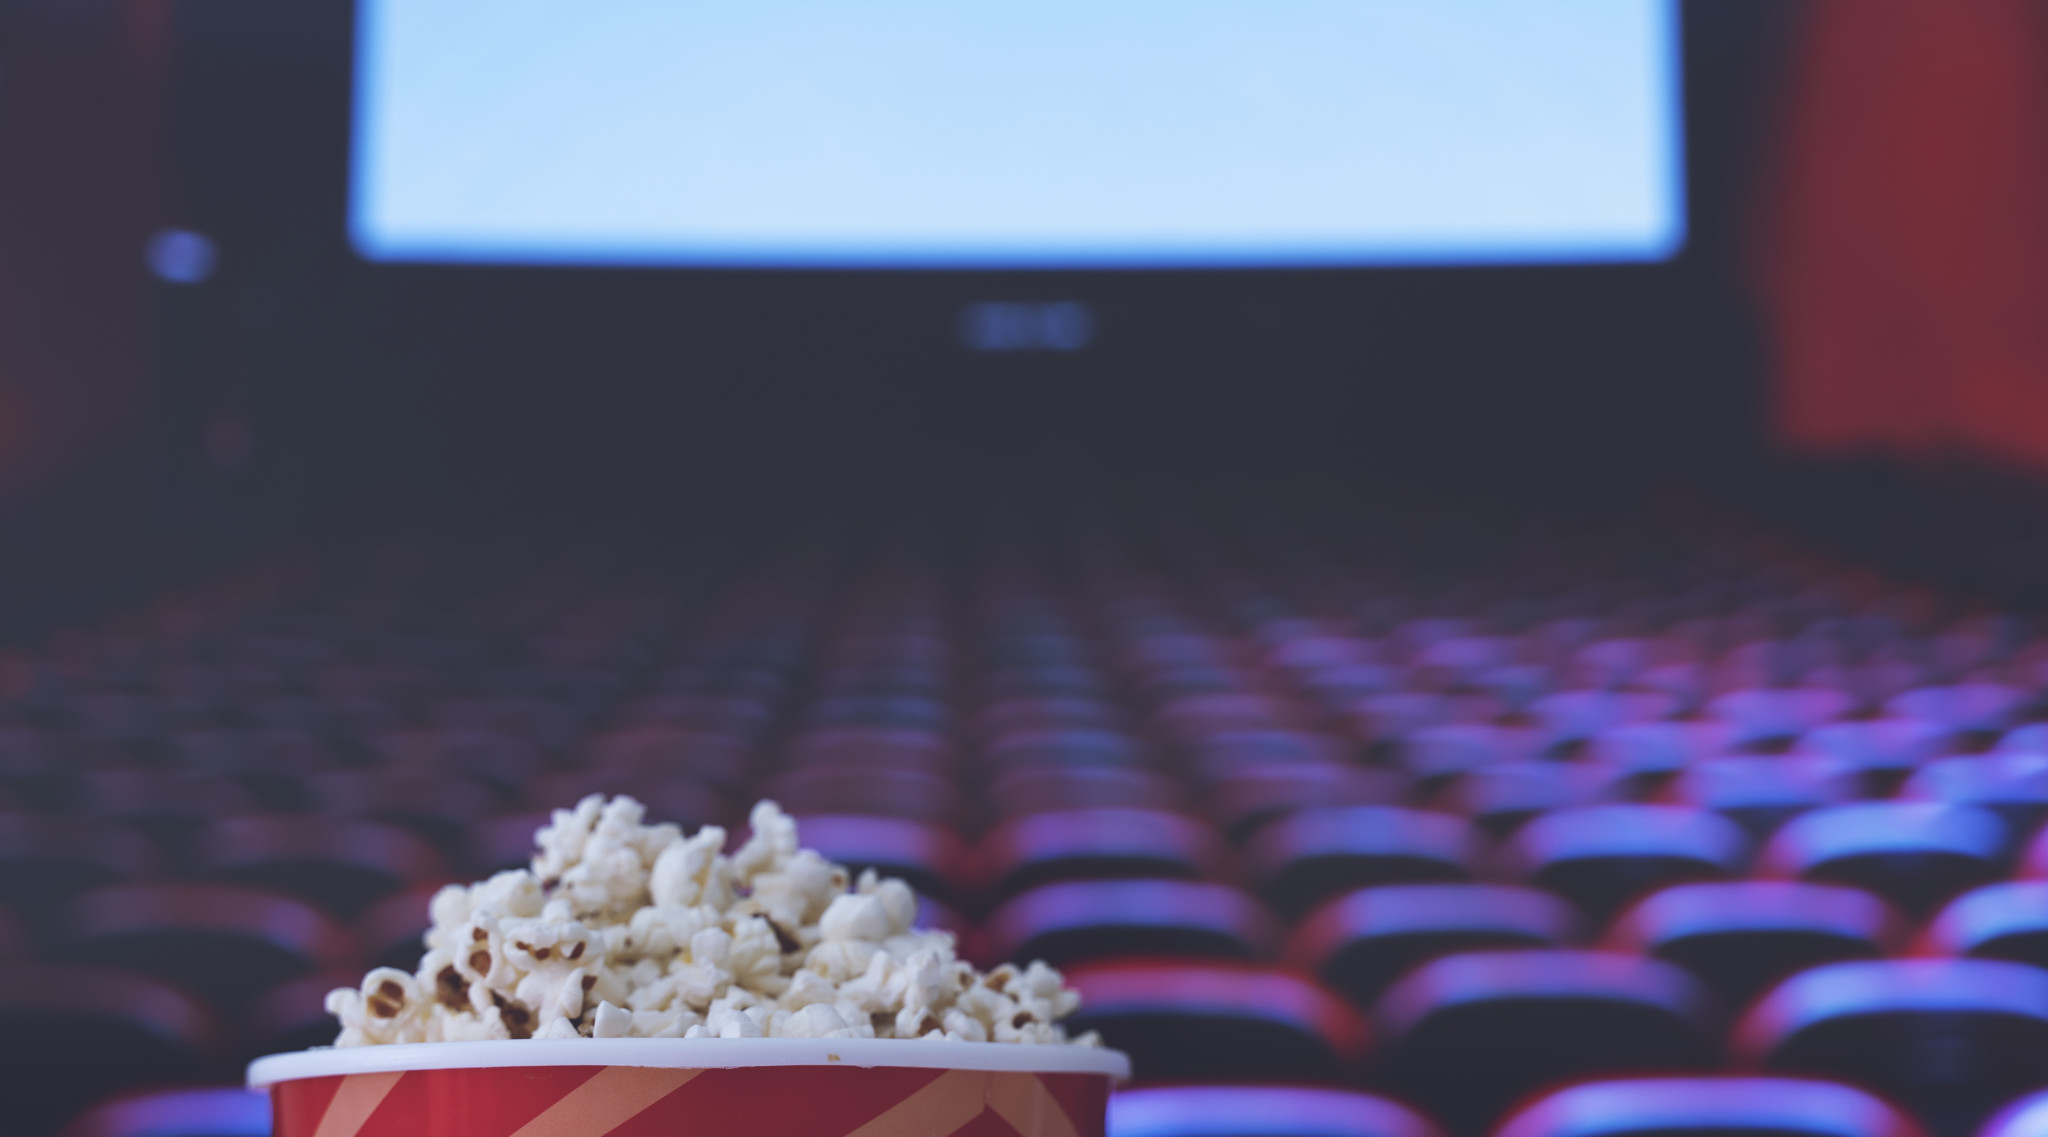 National Cinema Day: For One Day, Movie Tickets Will Only Cost $3